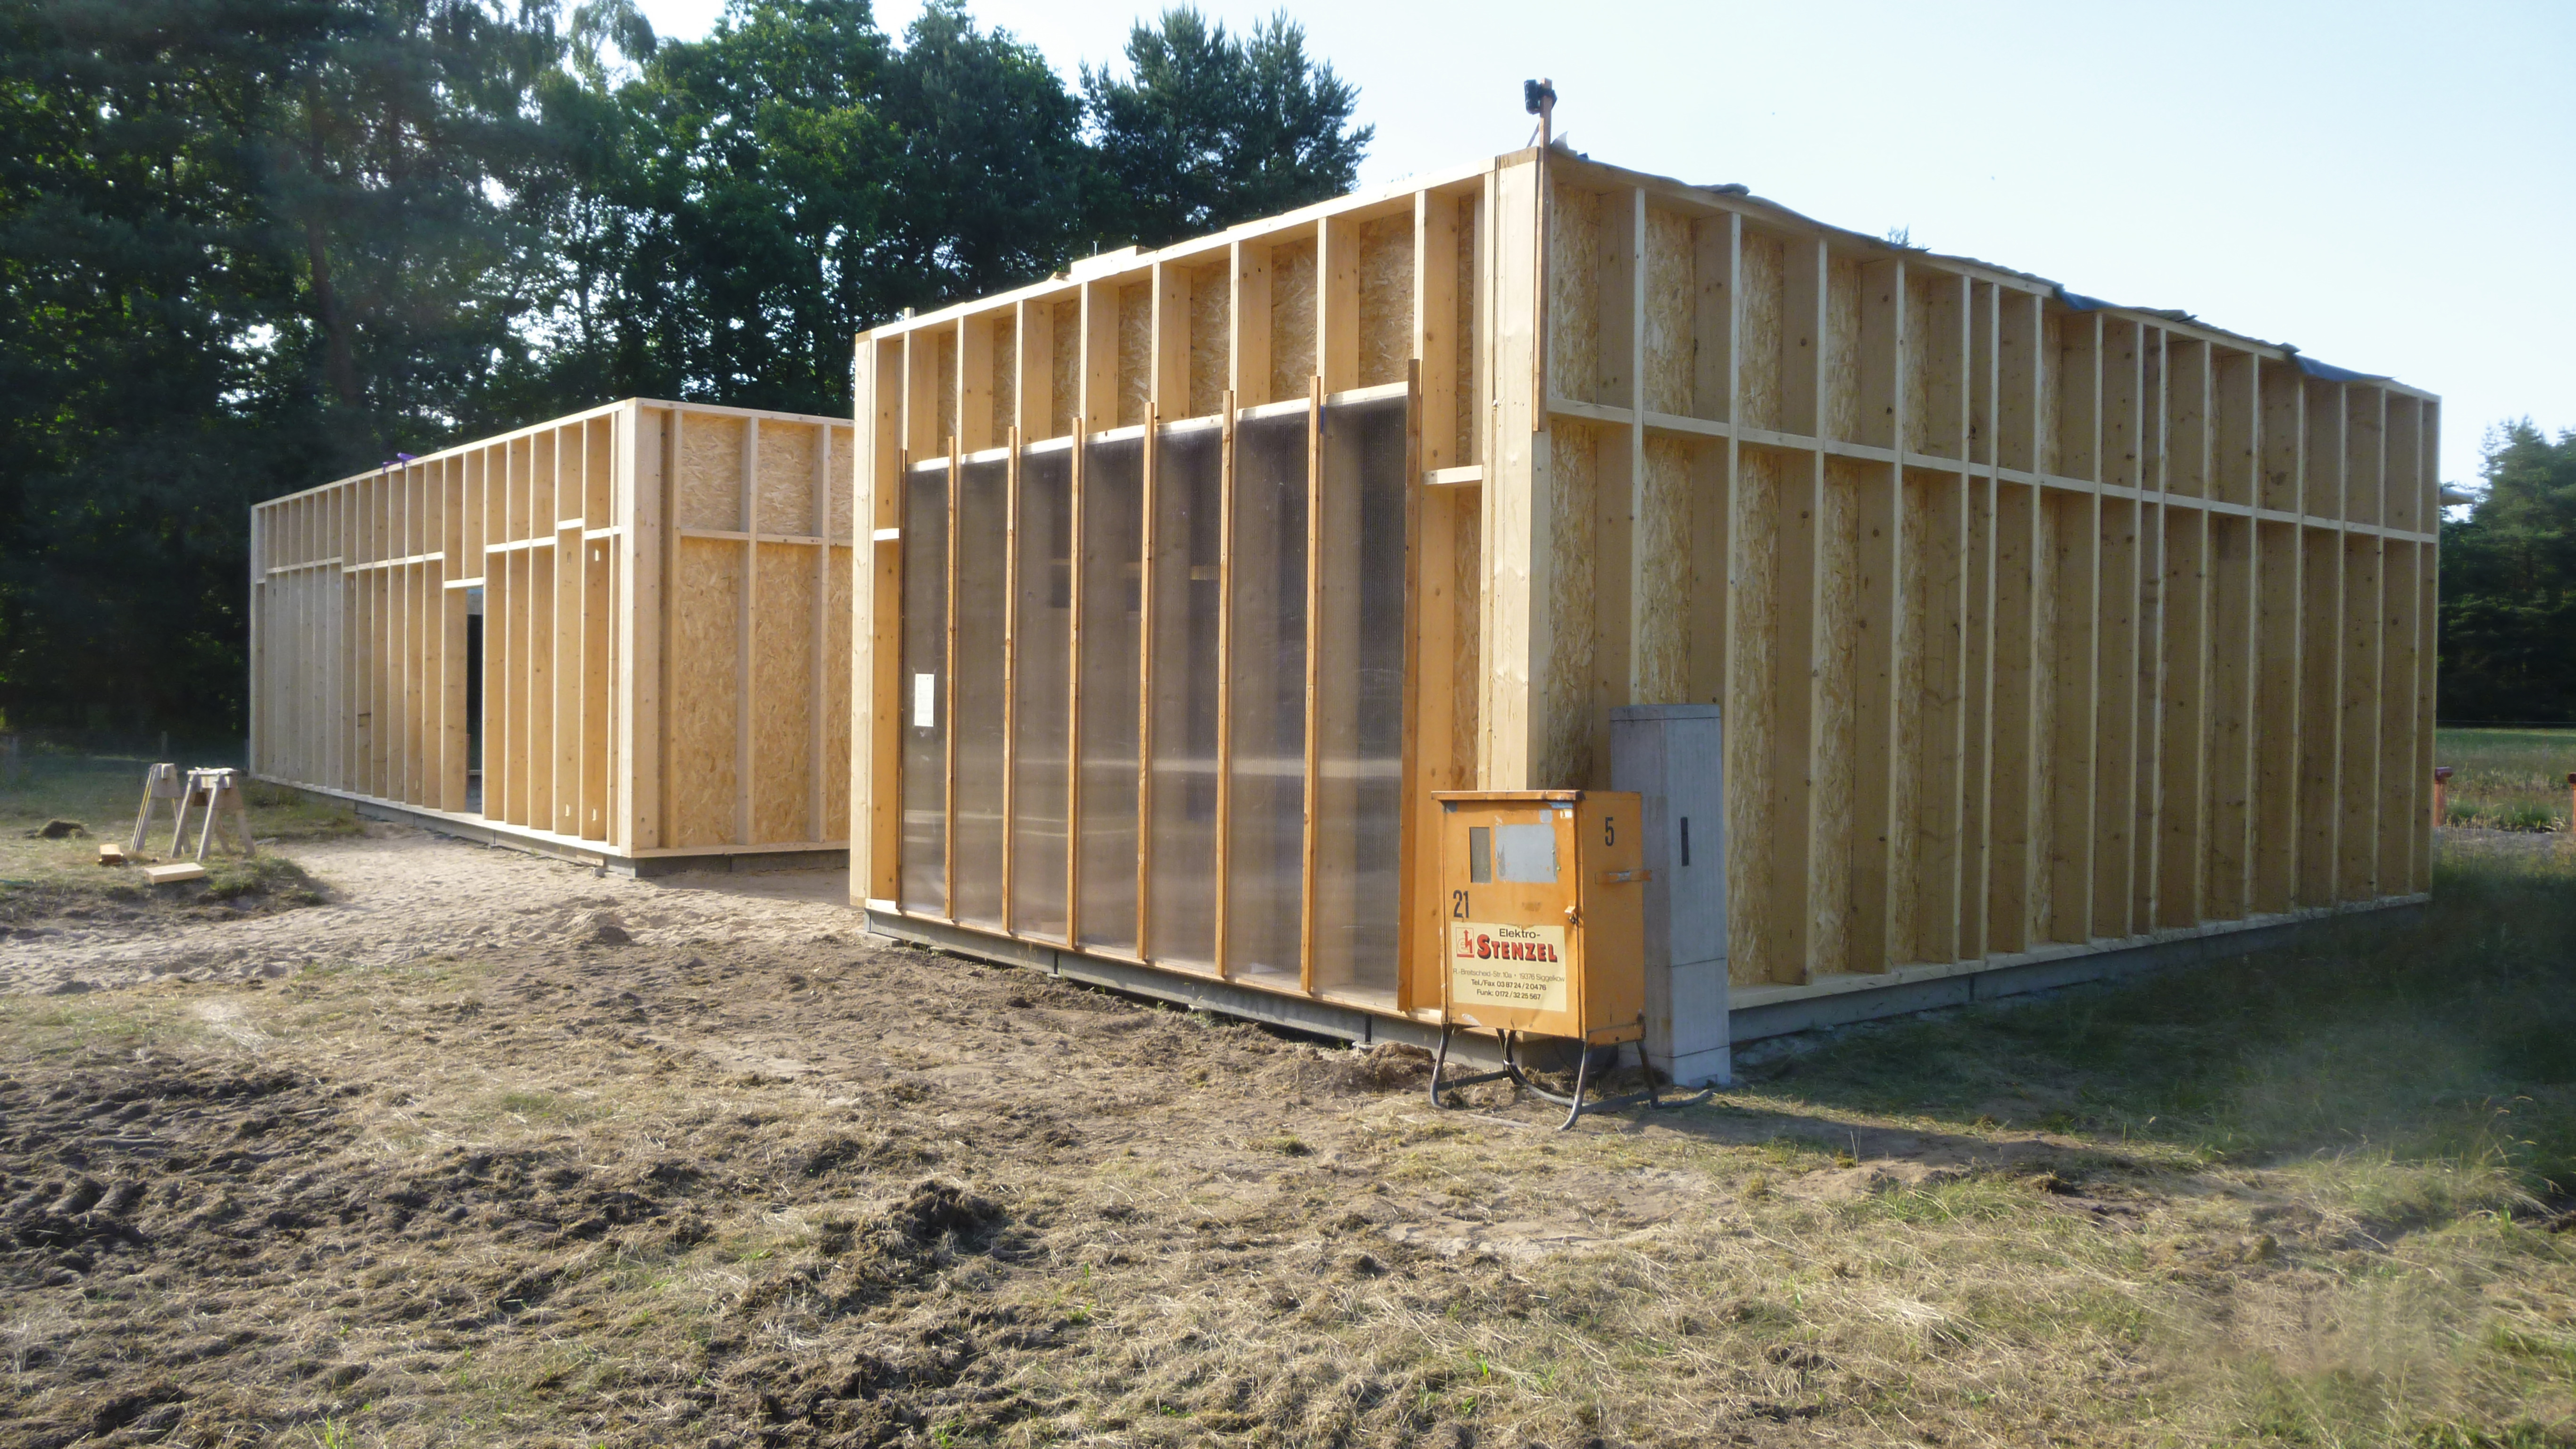 The carcass of the two residential units of 100 m² and 50 m² erected.